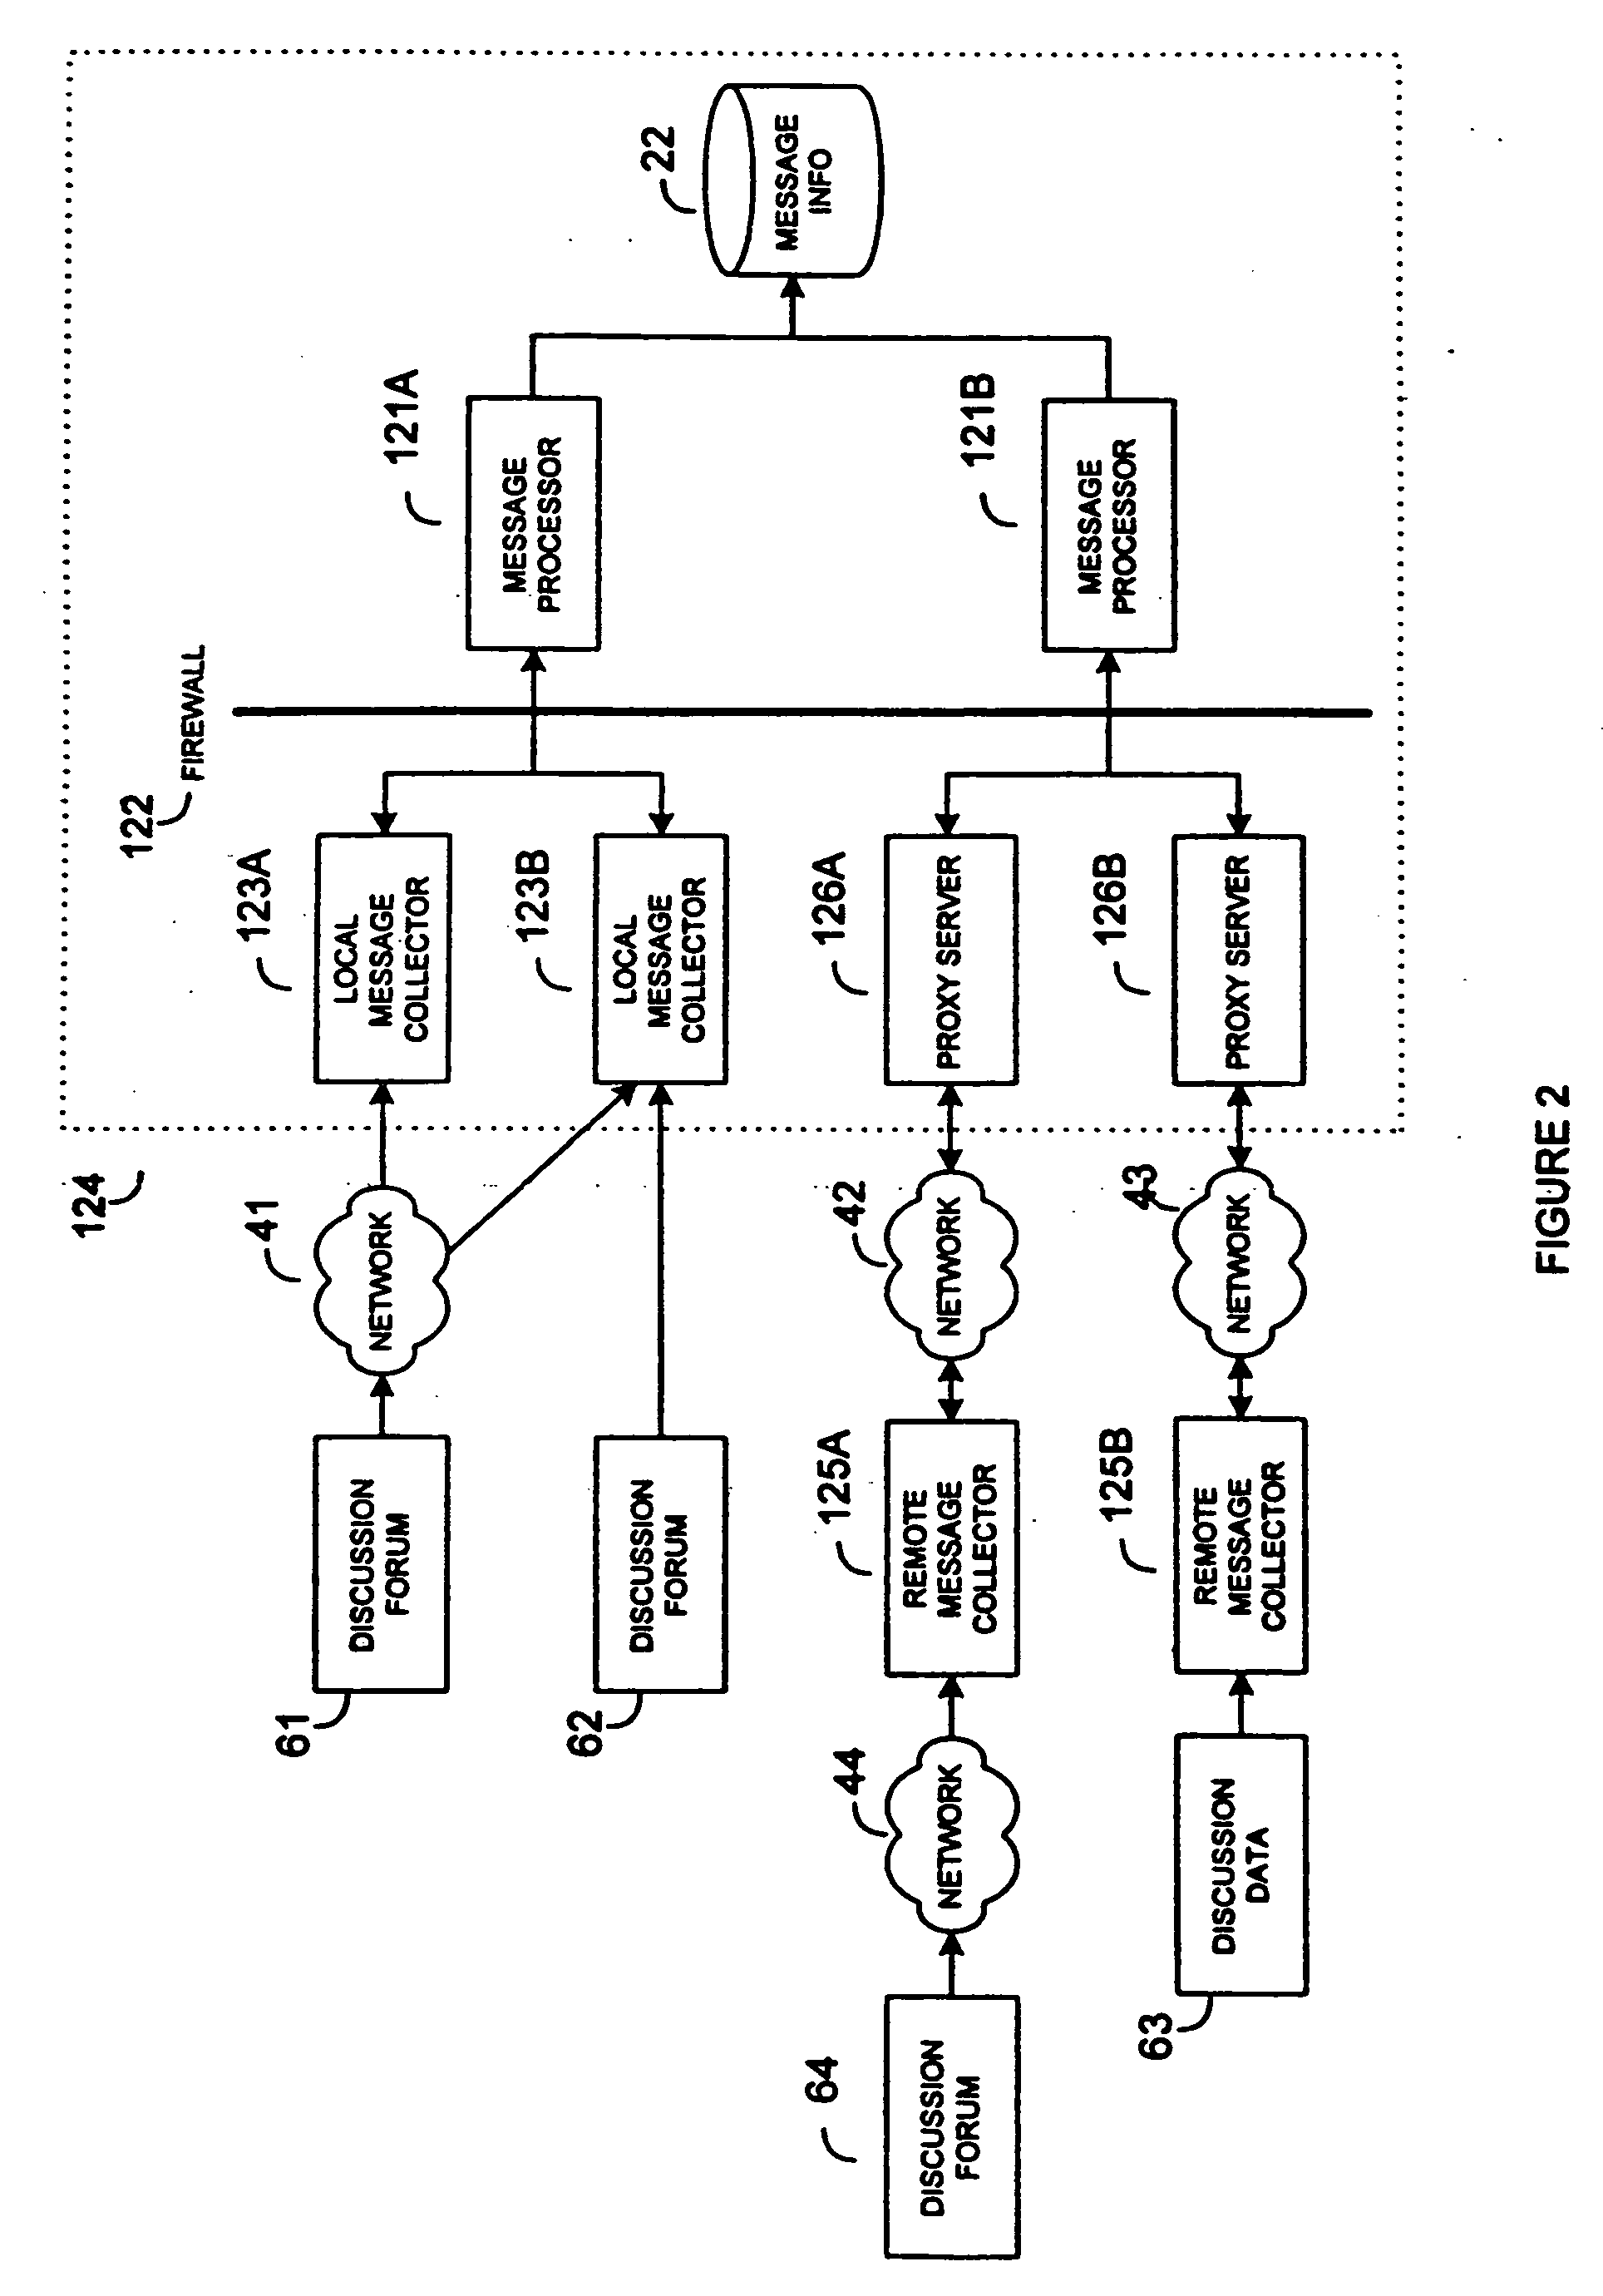 System and method for collection and analysis of electronic discussion messages